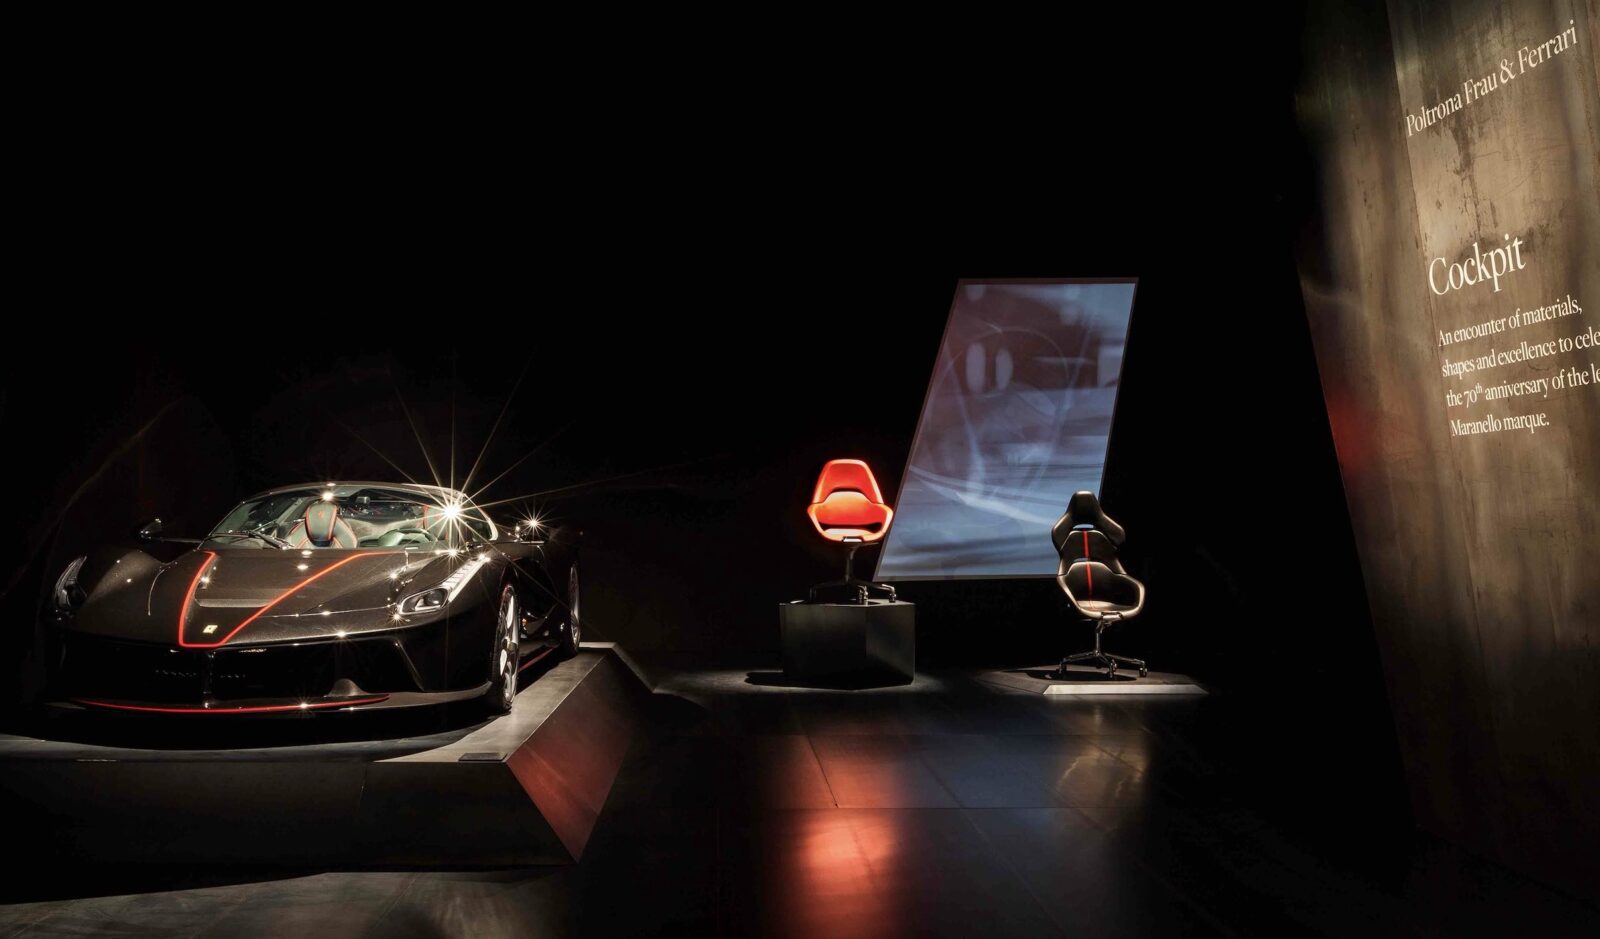 Ferrari office chairs on stage with car